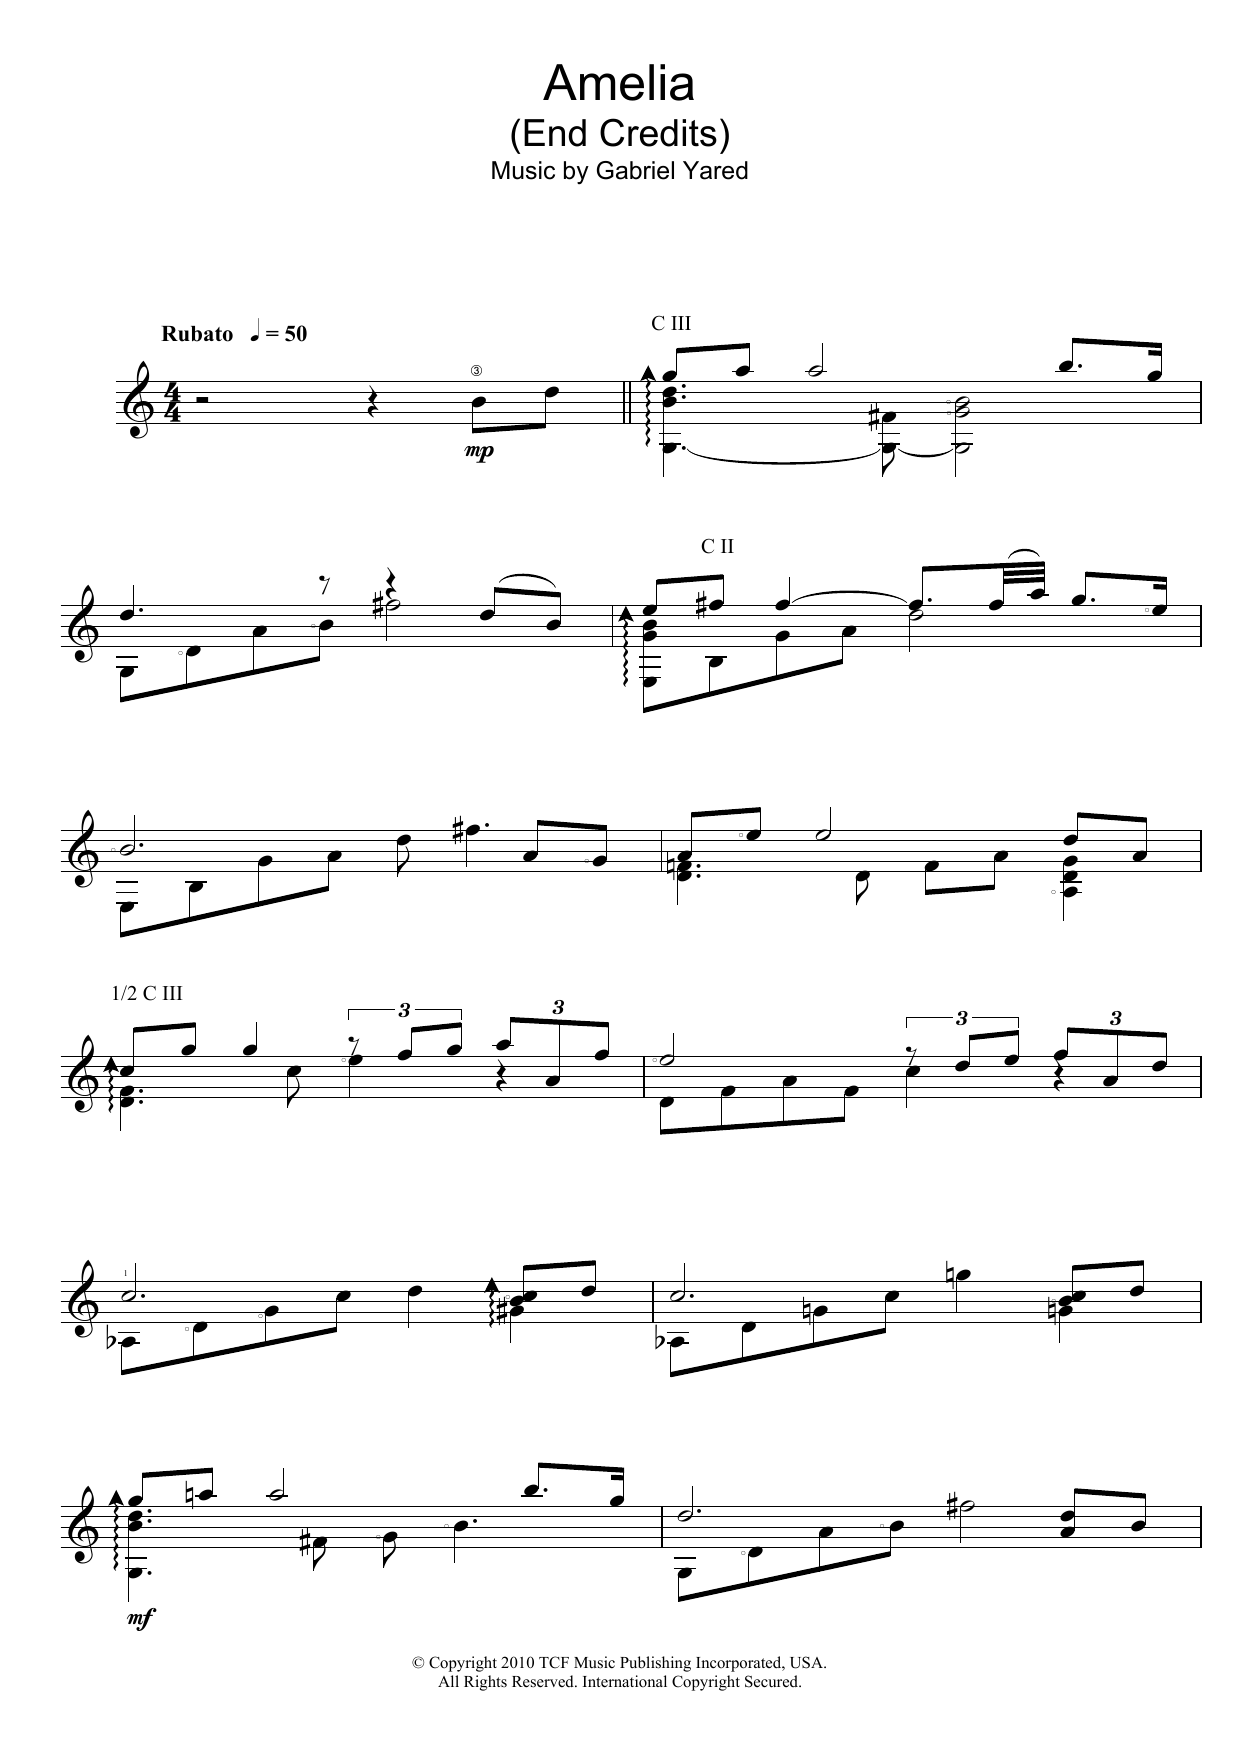 Gabriel Yared Amelia (End Credits) sheet music preview music notes and score for Guitar including 2 page(s)